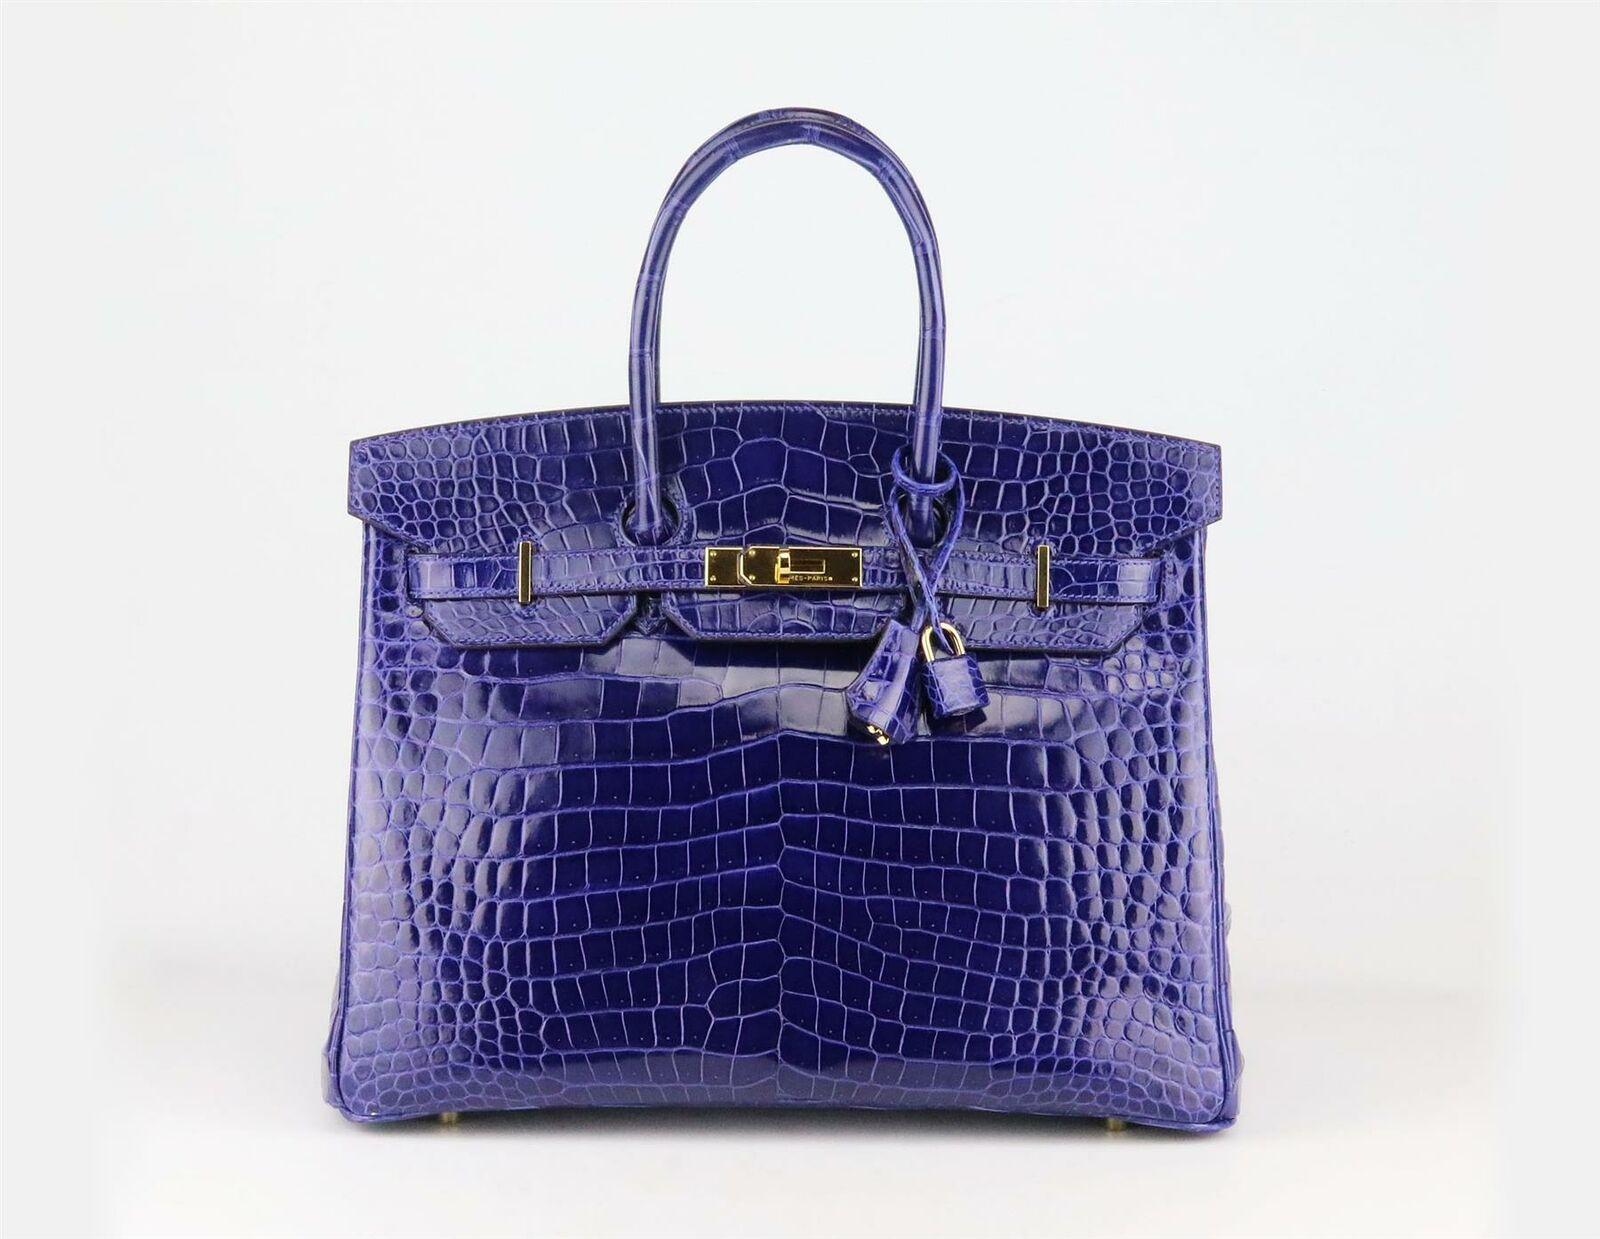 Made in France, this beautiful 2014 Hermès ‘Birkin’ 35cm handbag has been made from shiny Porosus Crocodile exterior in ‘Royal Blue’ and matching leather interior, this piece is decorated with gold hardware on the front and finished with top